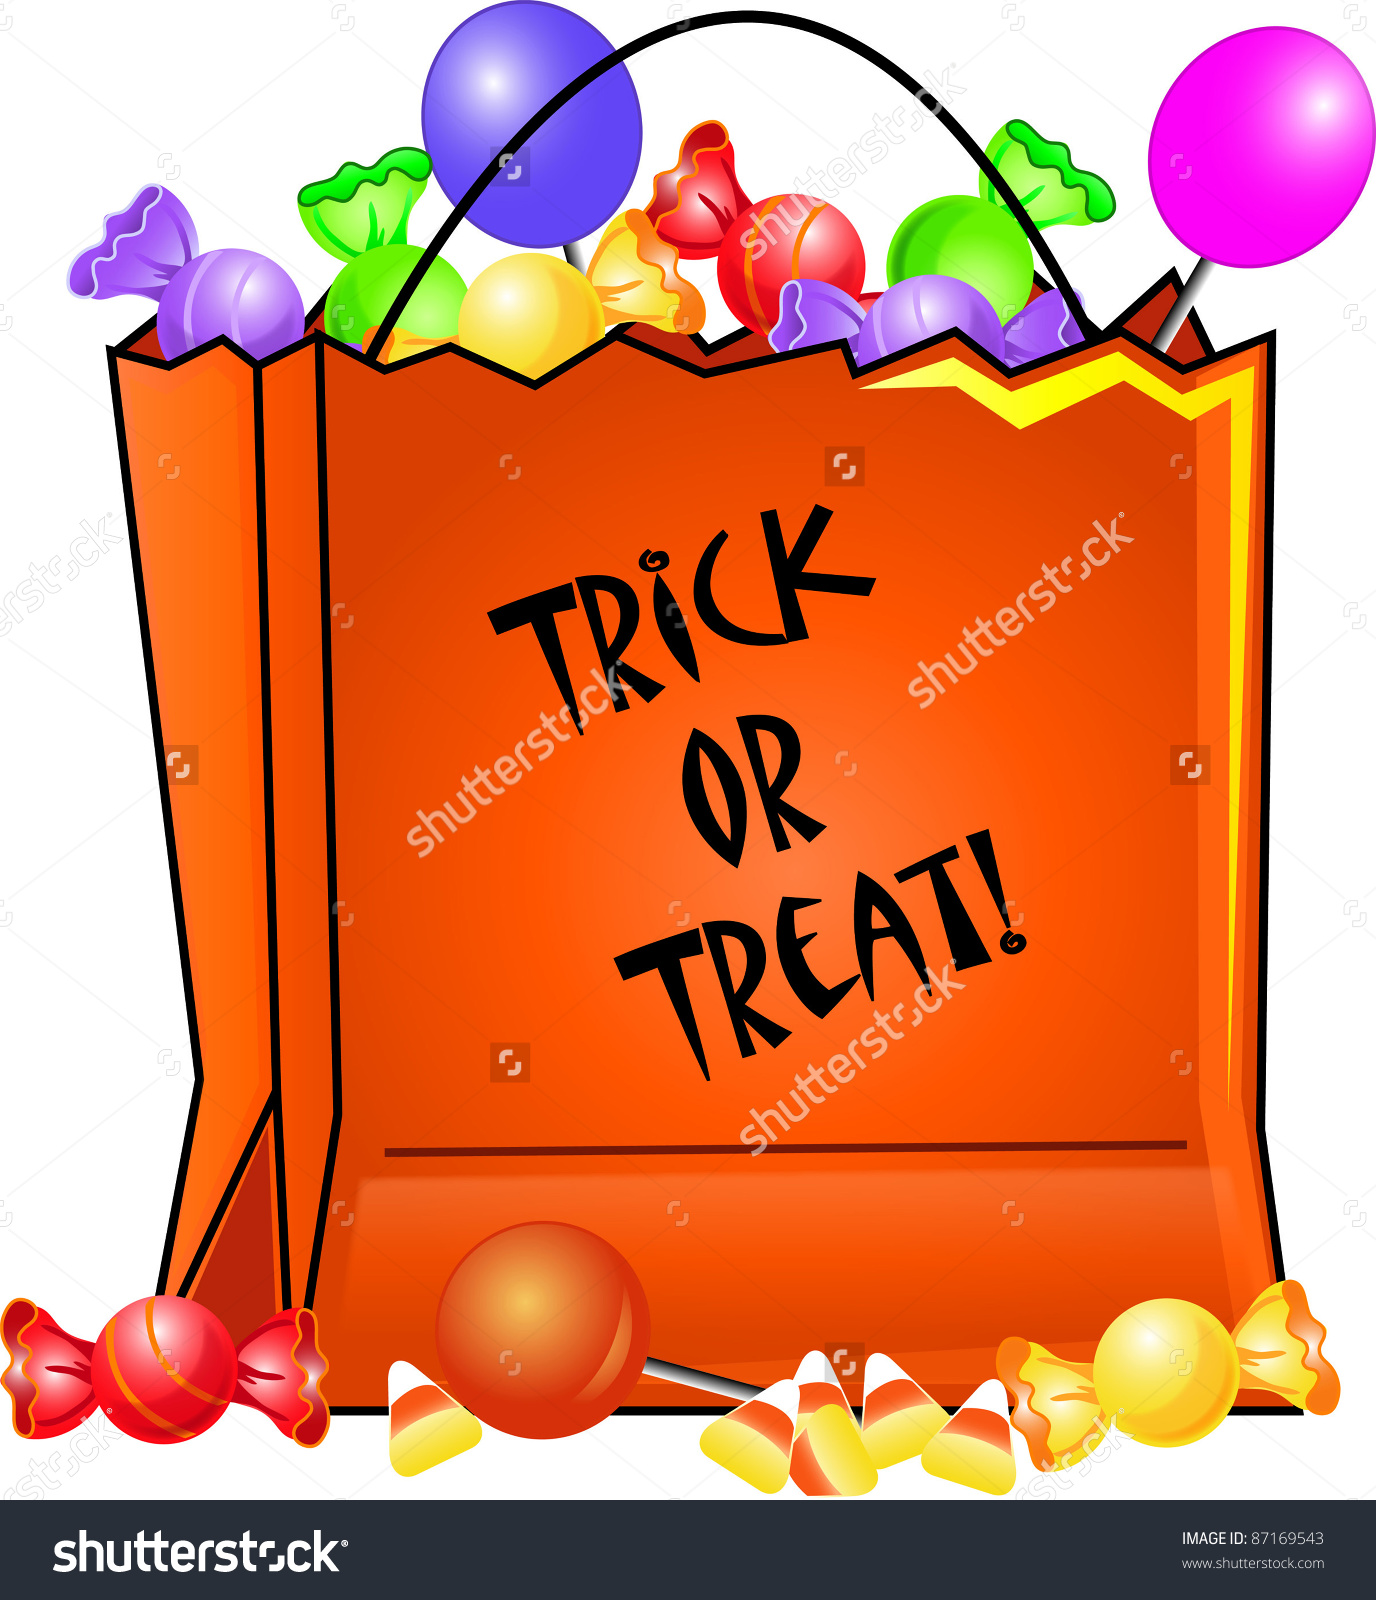 Clip art illustration of a Halloween trick or treat bag filled with candies.